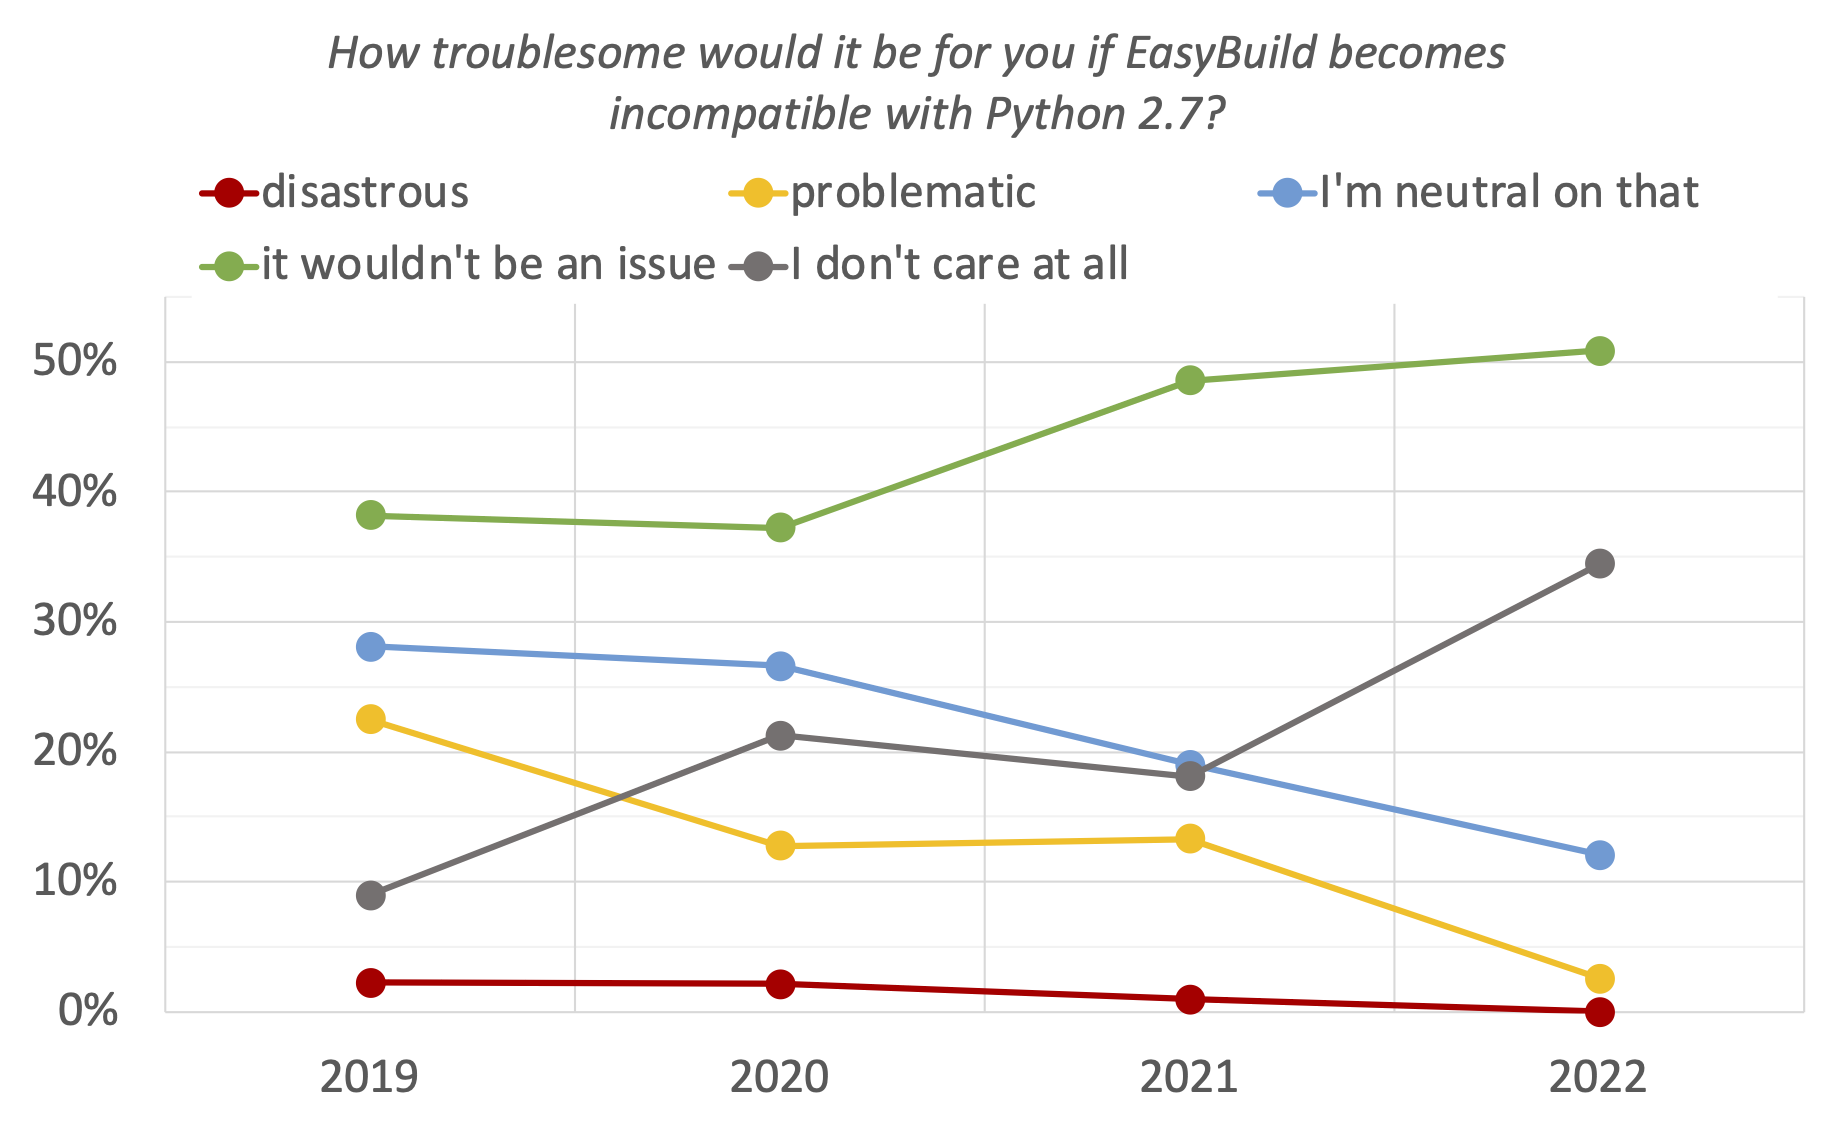 10. How troublesome would it be for you if EasyBuild becomes incompatible with Python 2.7? (evolution since 2019)